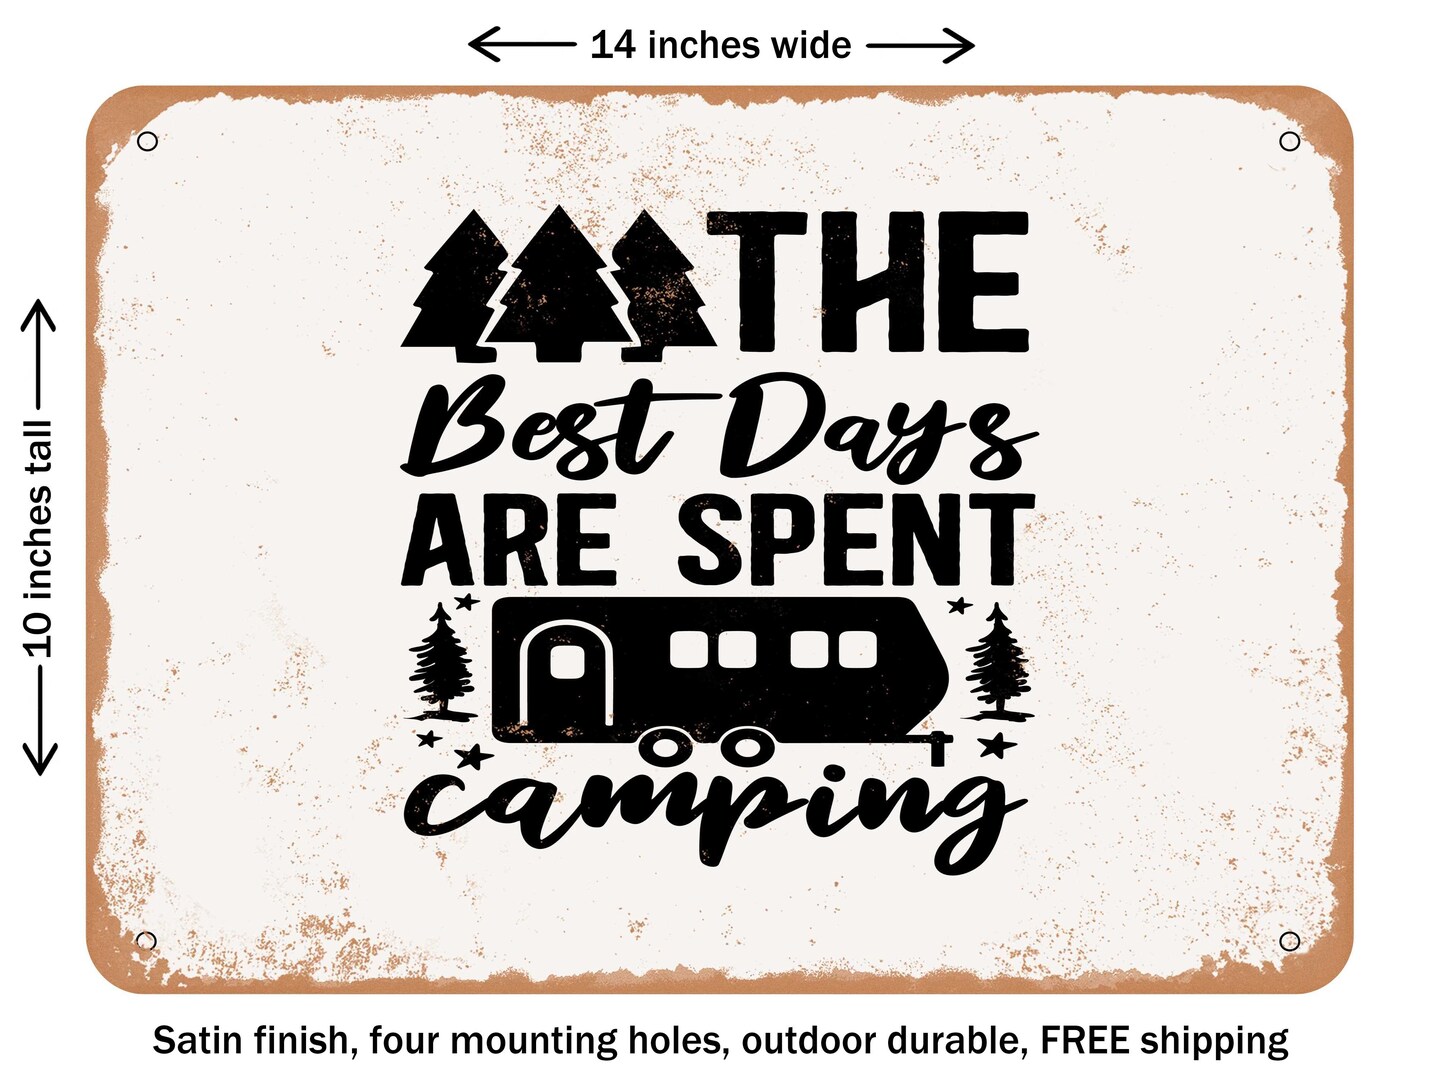 DECORATIVE METAL SIGN - the Best Days Are Spent Camping - 2 - Vintage Rusty Look